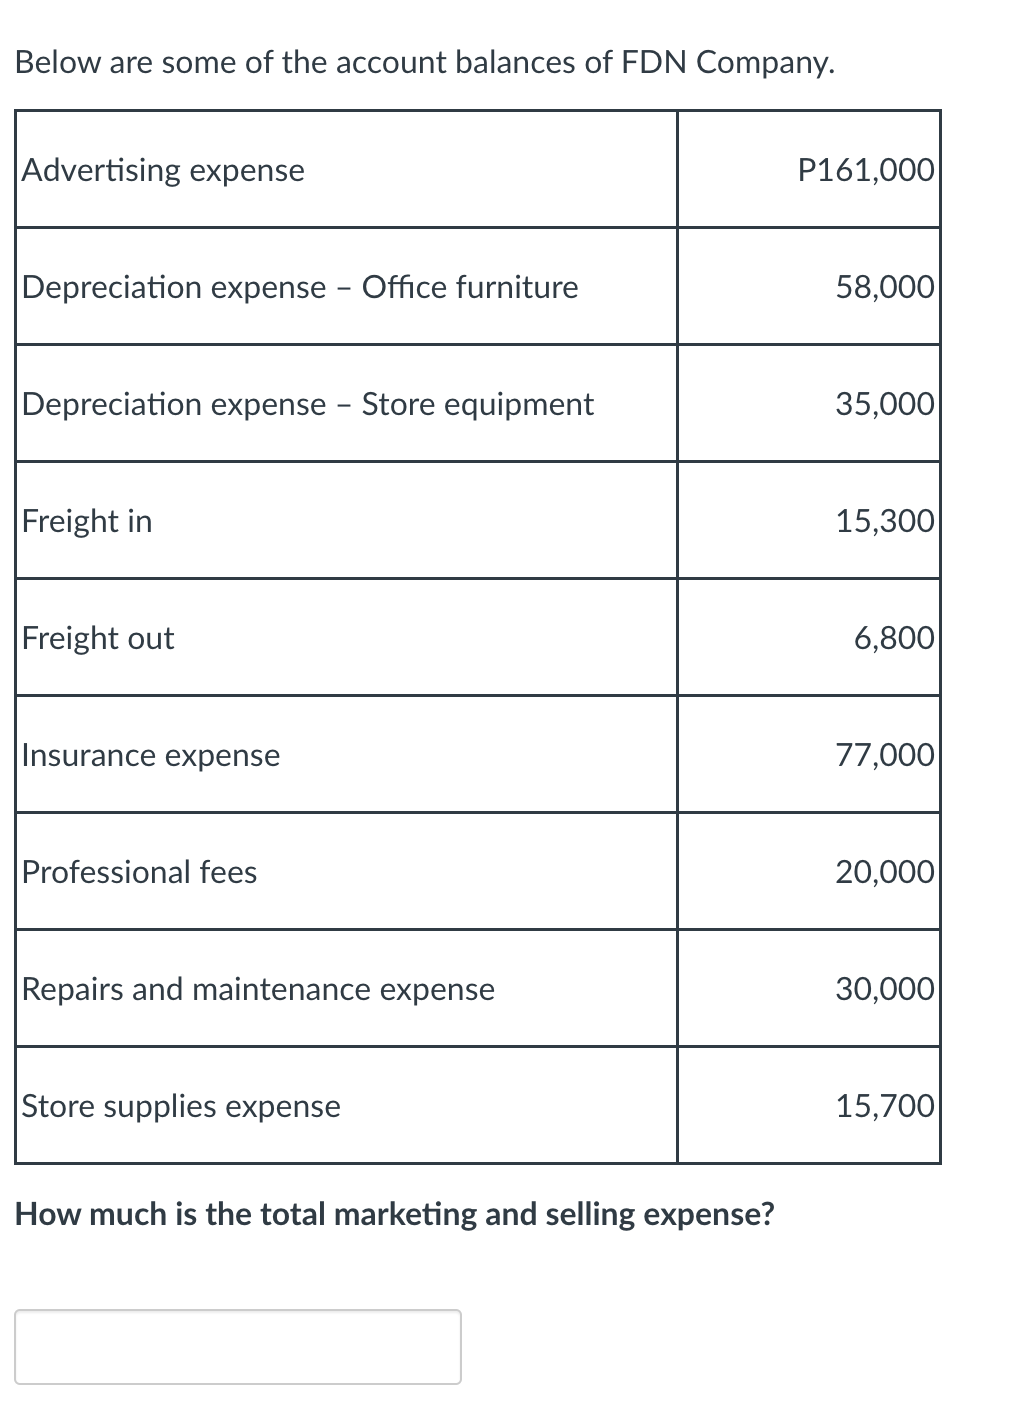 Below are some of the account balances of FDN Company.
Advertising expense
P161,000
Depreciation expense - Office furniture
58,000
Depreciation expense - Store equipment
35,000
Freight in
15,300
Freight out
6,800
Insurance expense
77,000
Professional fees
20,000
Repairs and maintenance expense
30,000
Store supplies expense
15,700
How much is the total marketing and selling expense?
